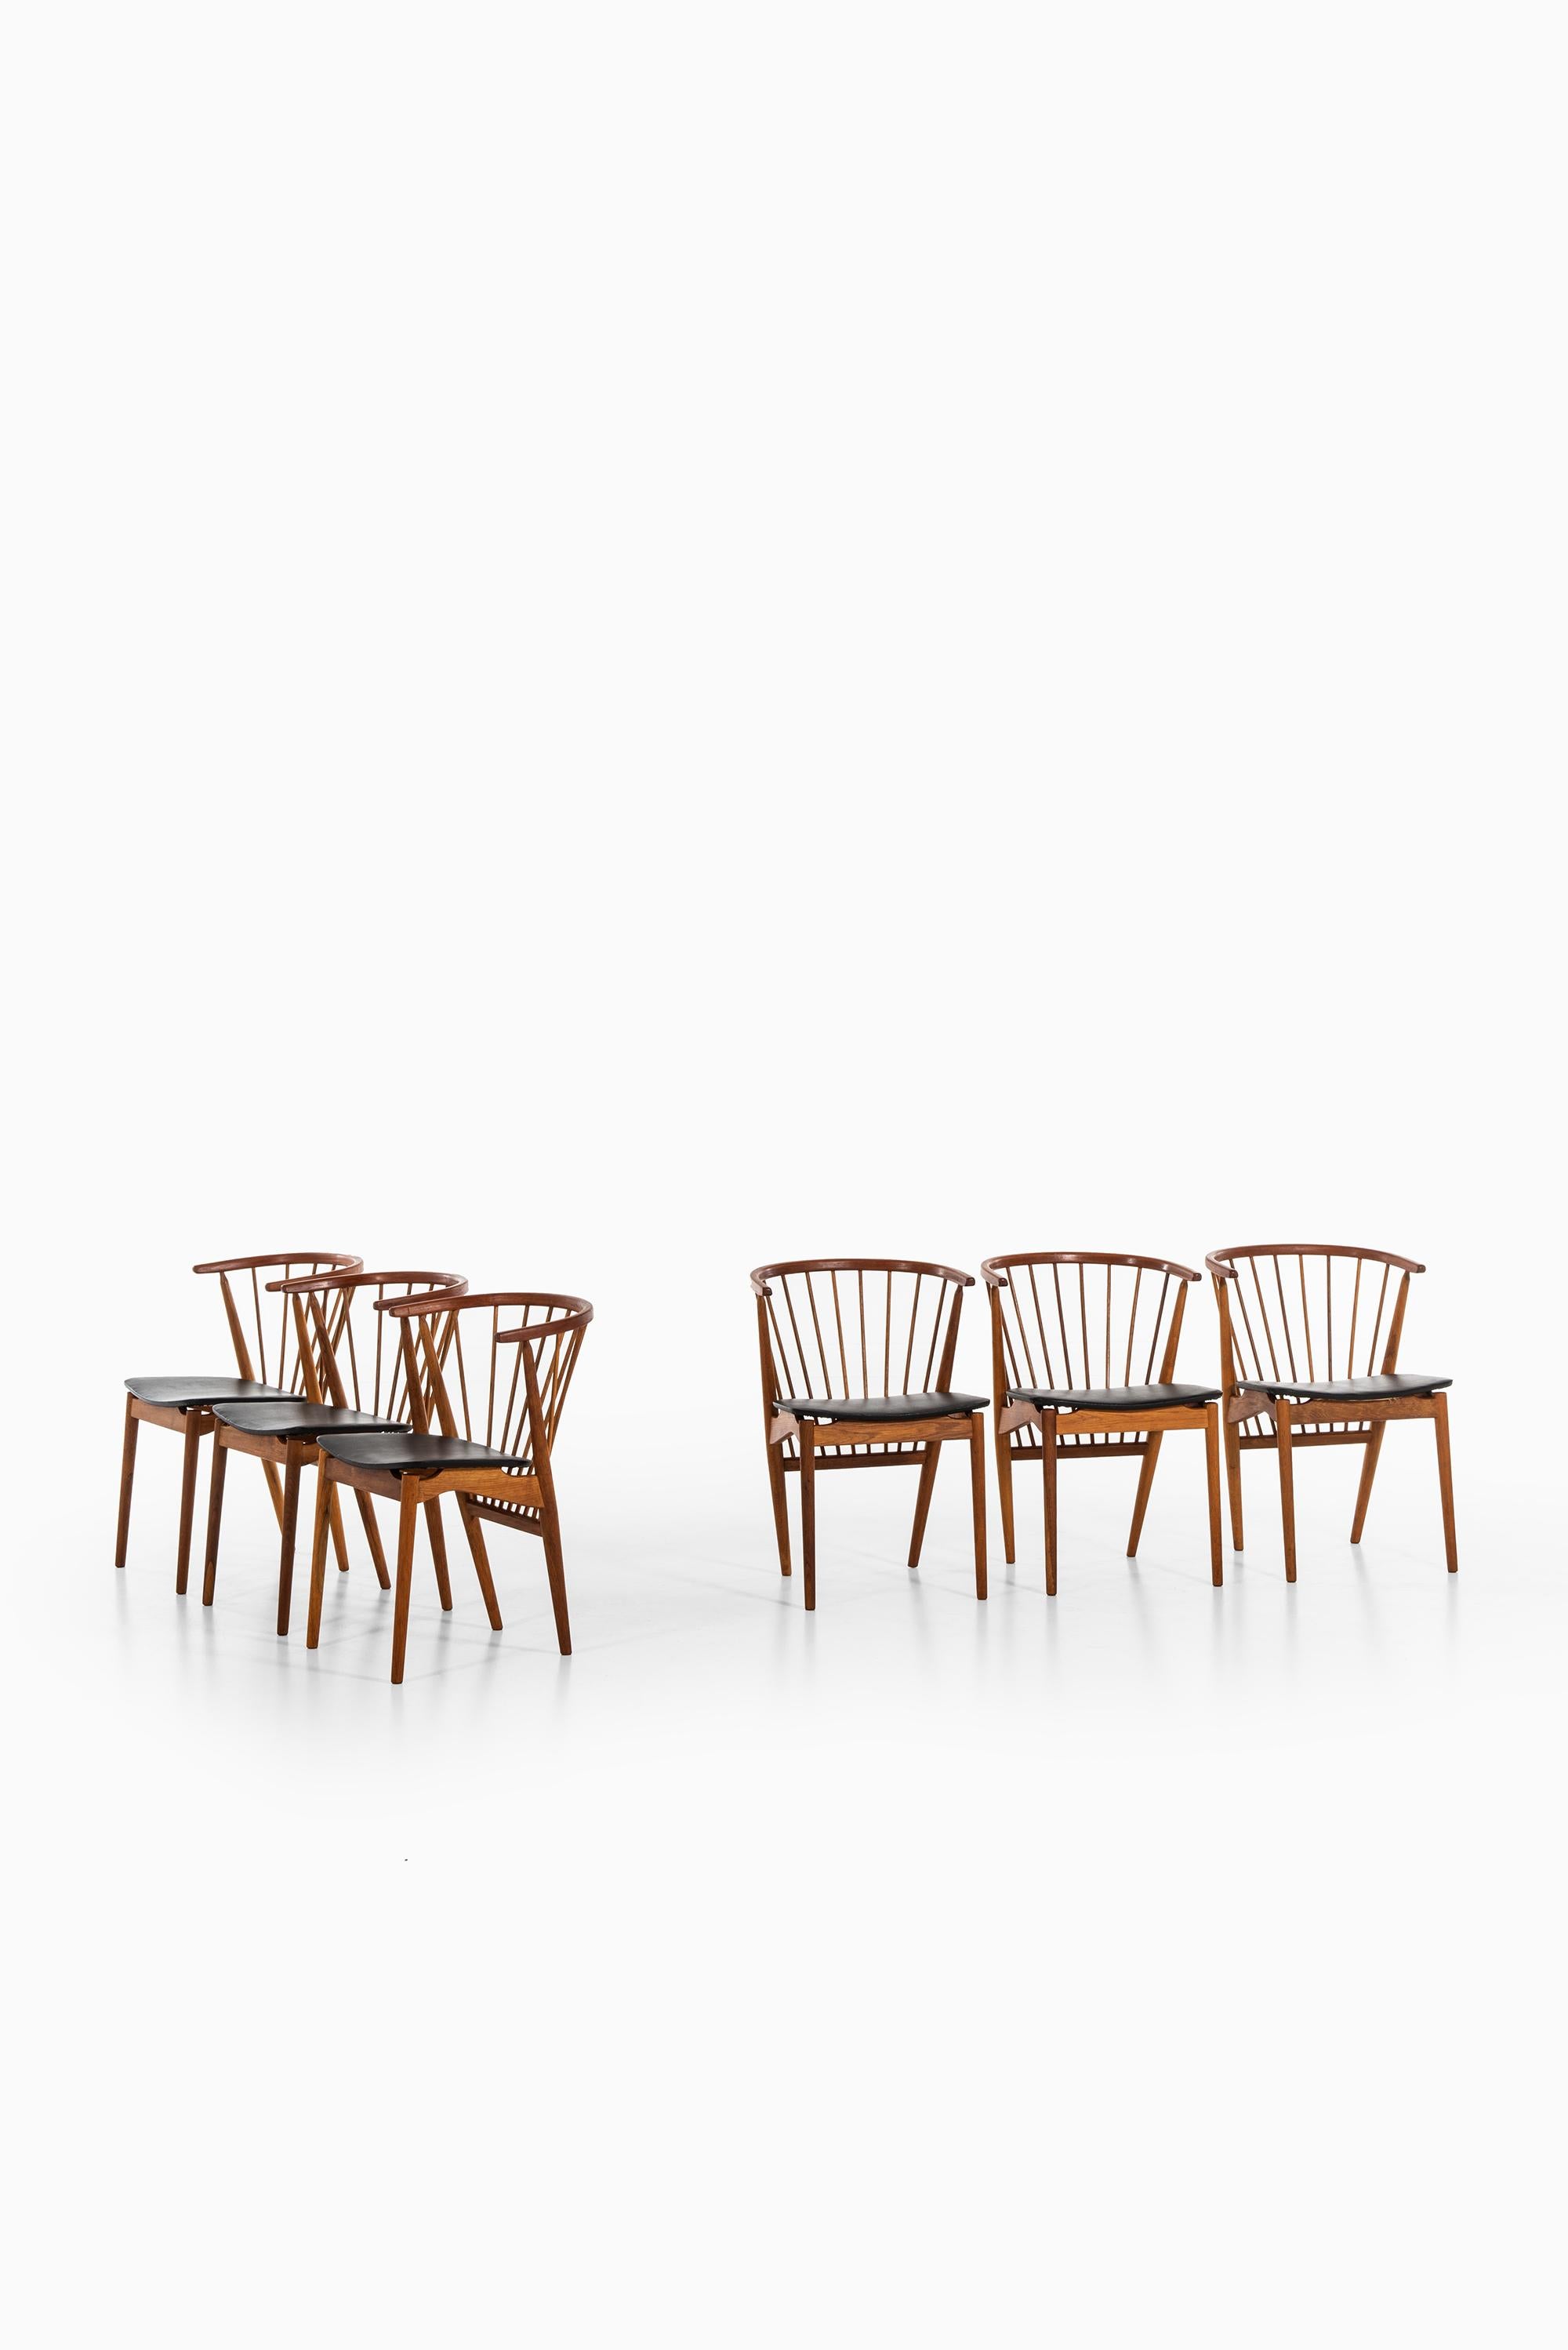 Rare set of 6 dining chairs model no 6 designed by Helge Sibast. Produced by Sibast møbelfabrik in Denmark.